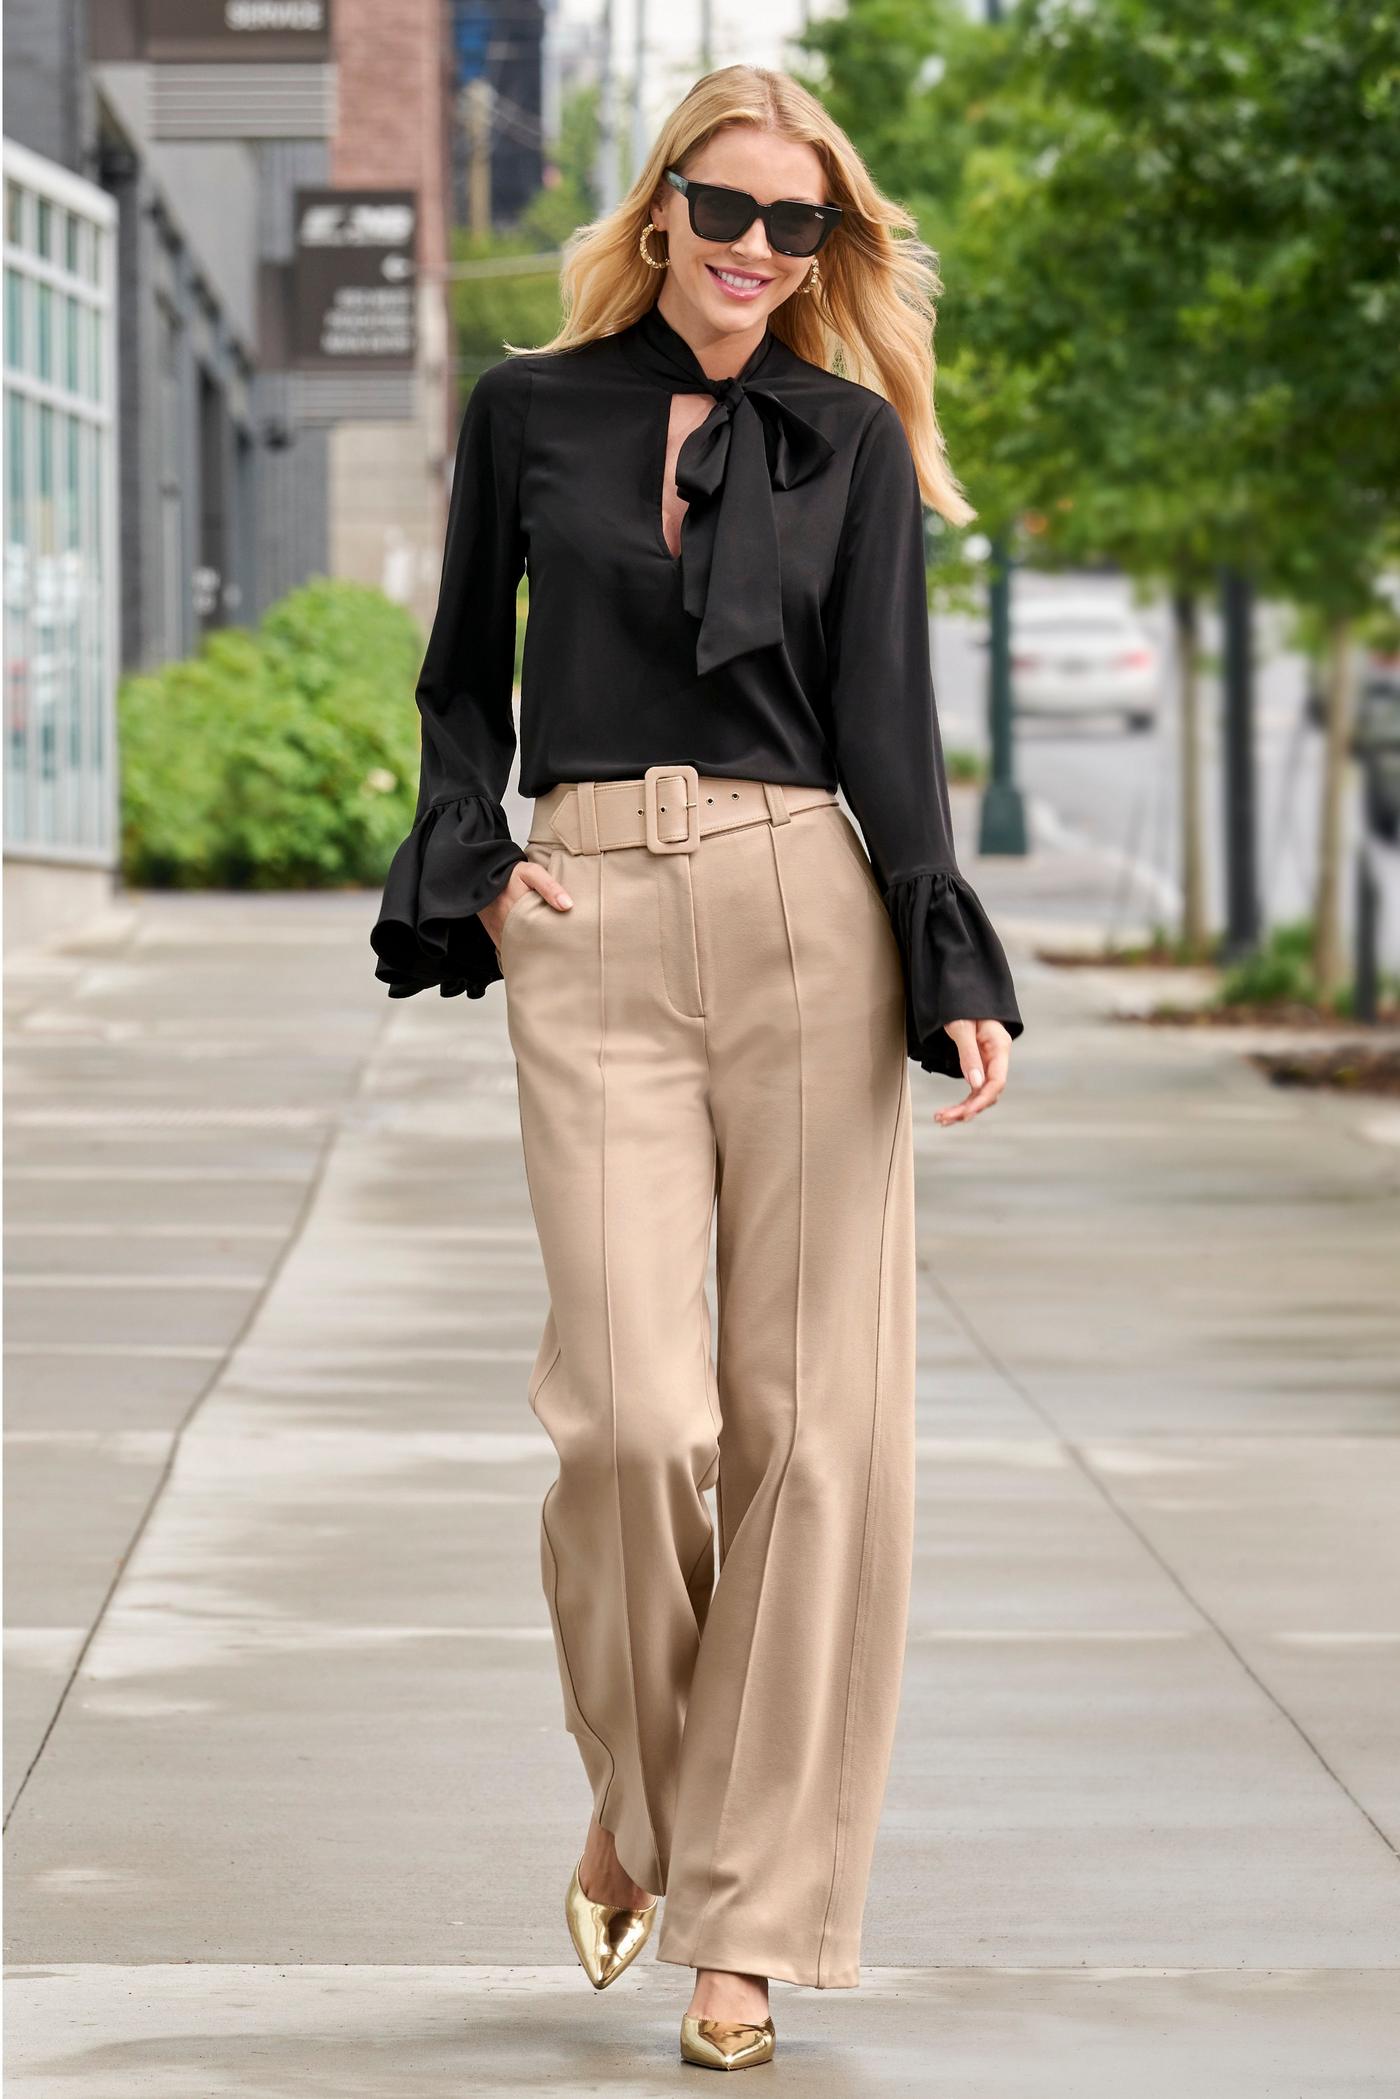 Insight Sight Ruched Ankle Pant in Natural